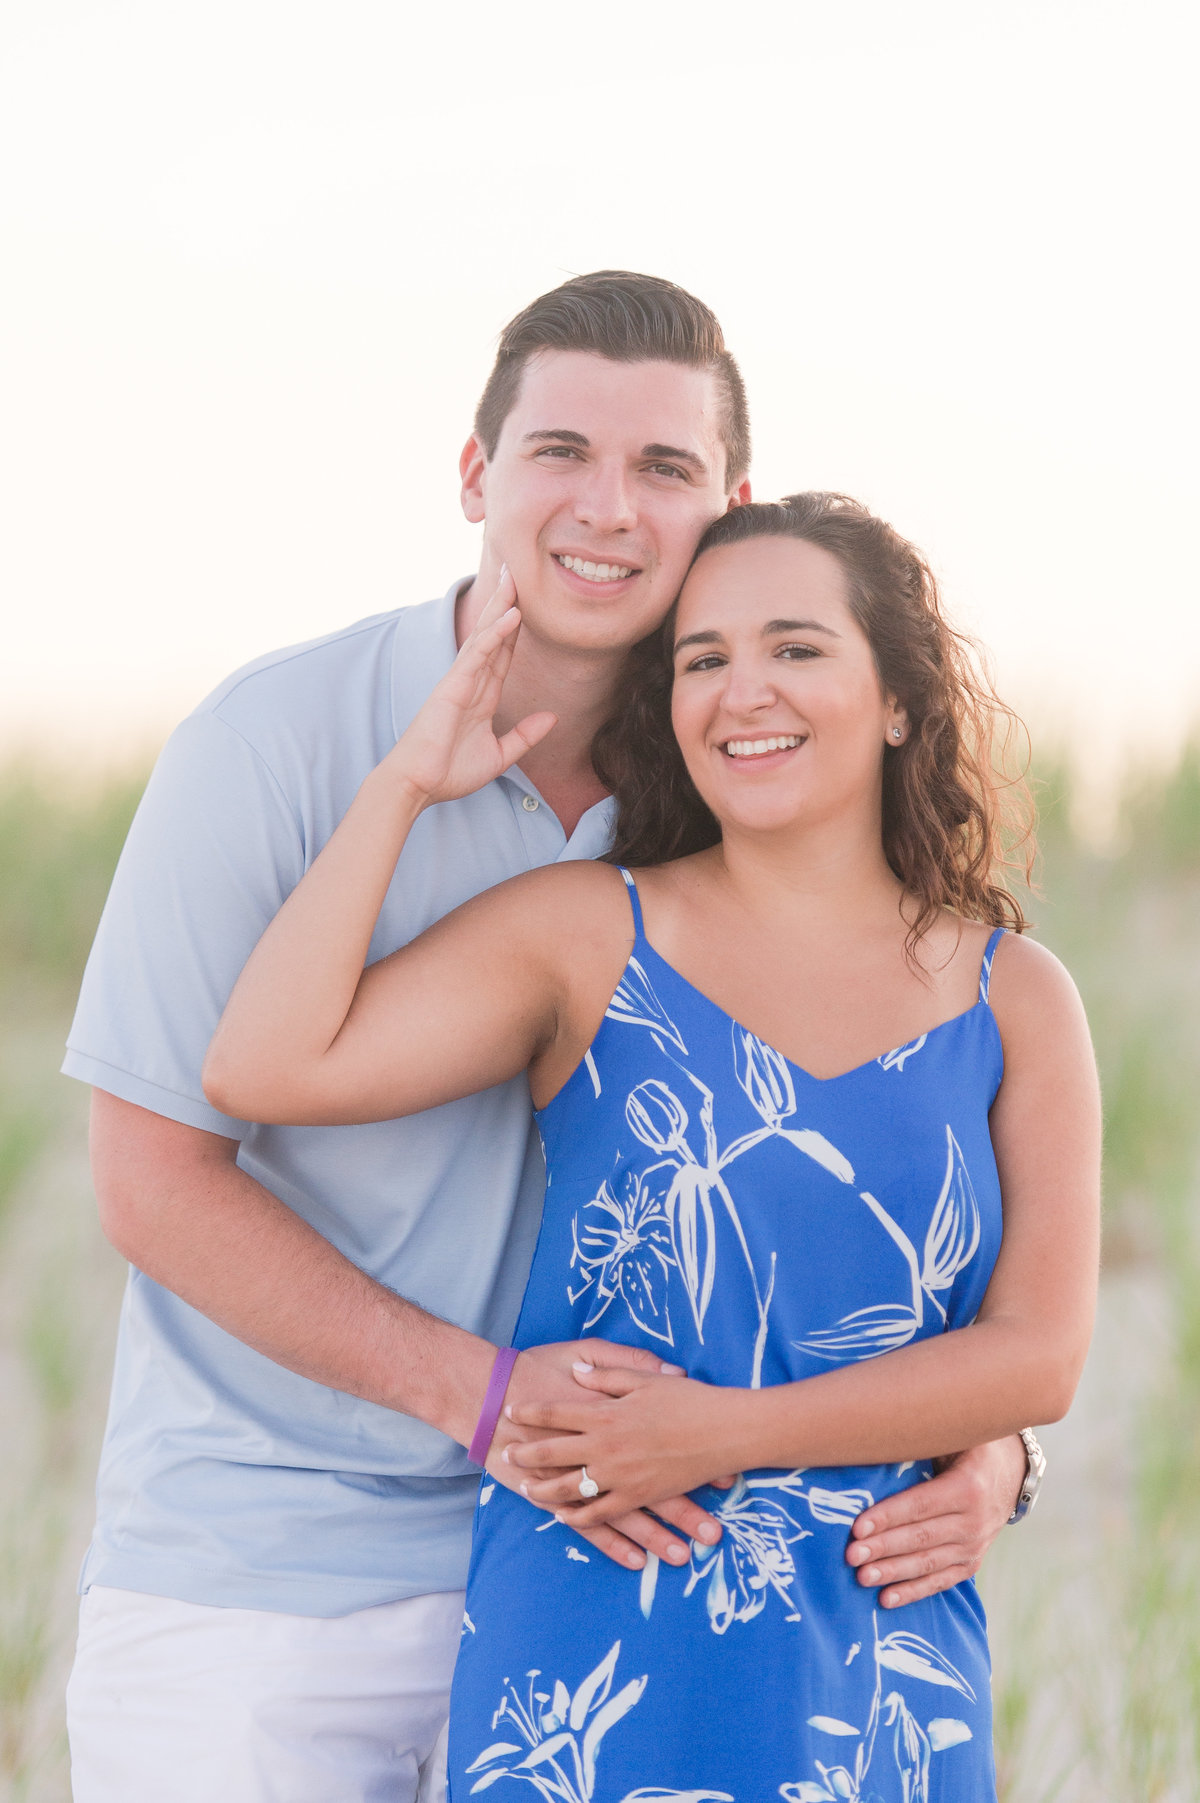 summer-surprise-proposal-lavallette-beach-new-jersey-wedding-photographer-imagery-by-marianne-73